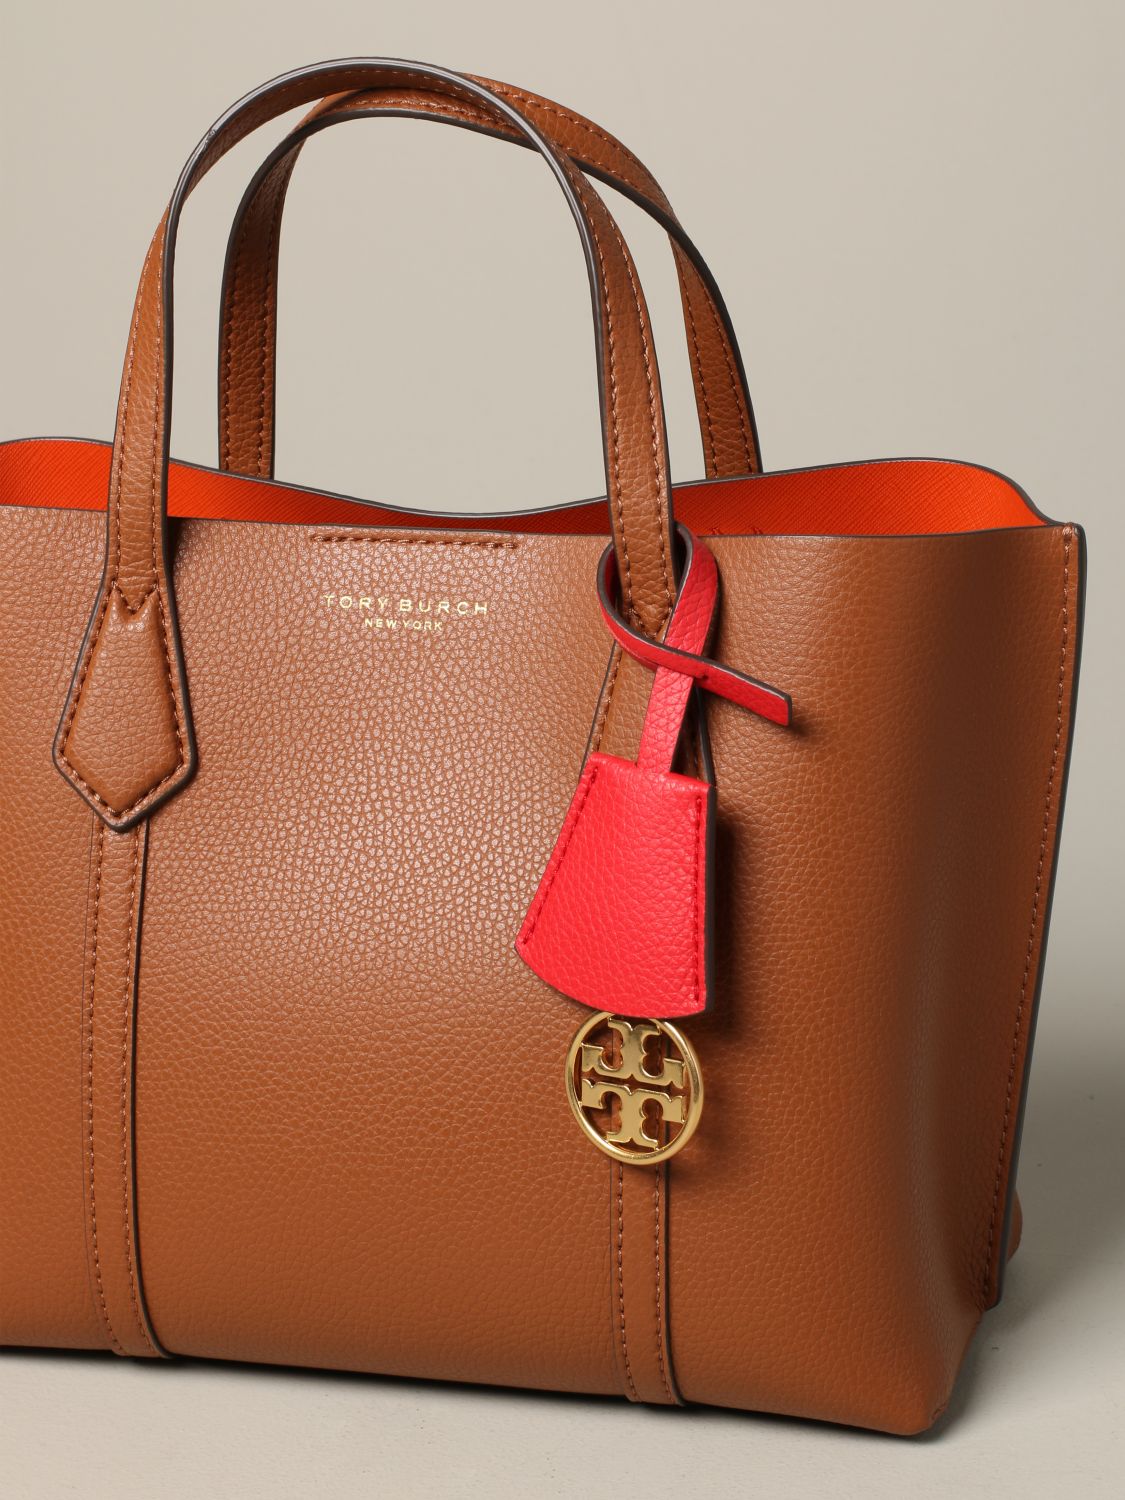 Tory Burch Leather Trimmed Raffia Tote - Brown Totes, Handbags - WTO567855